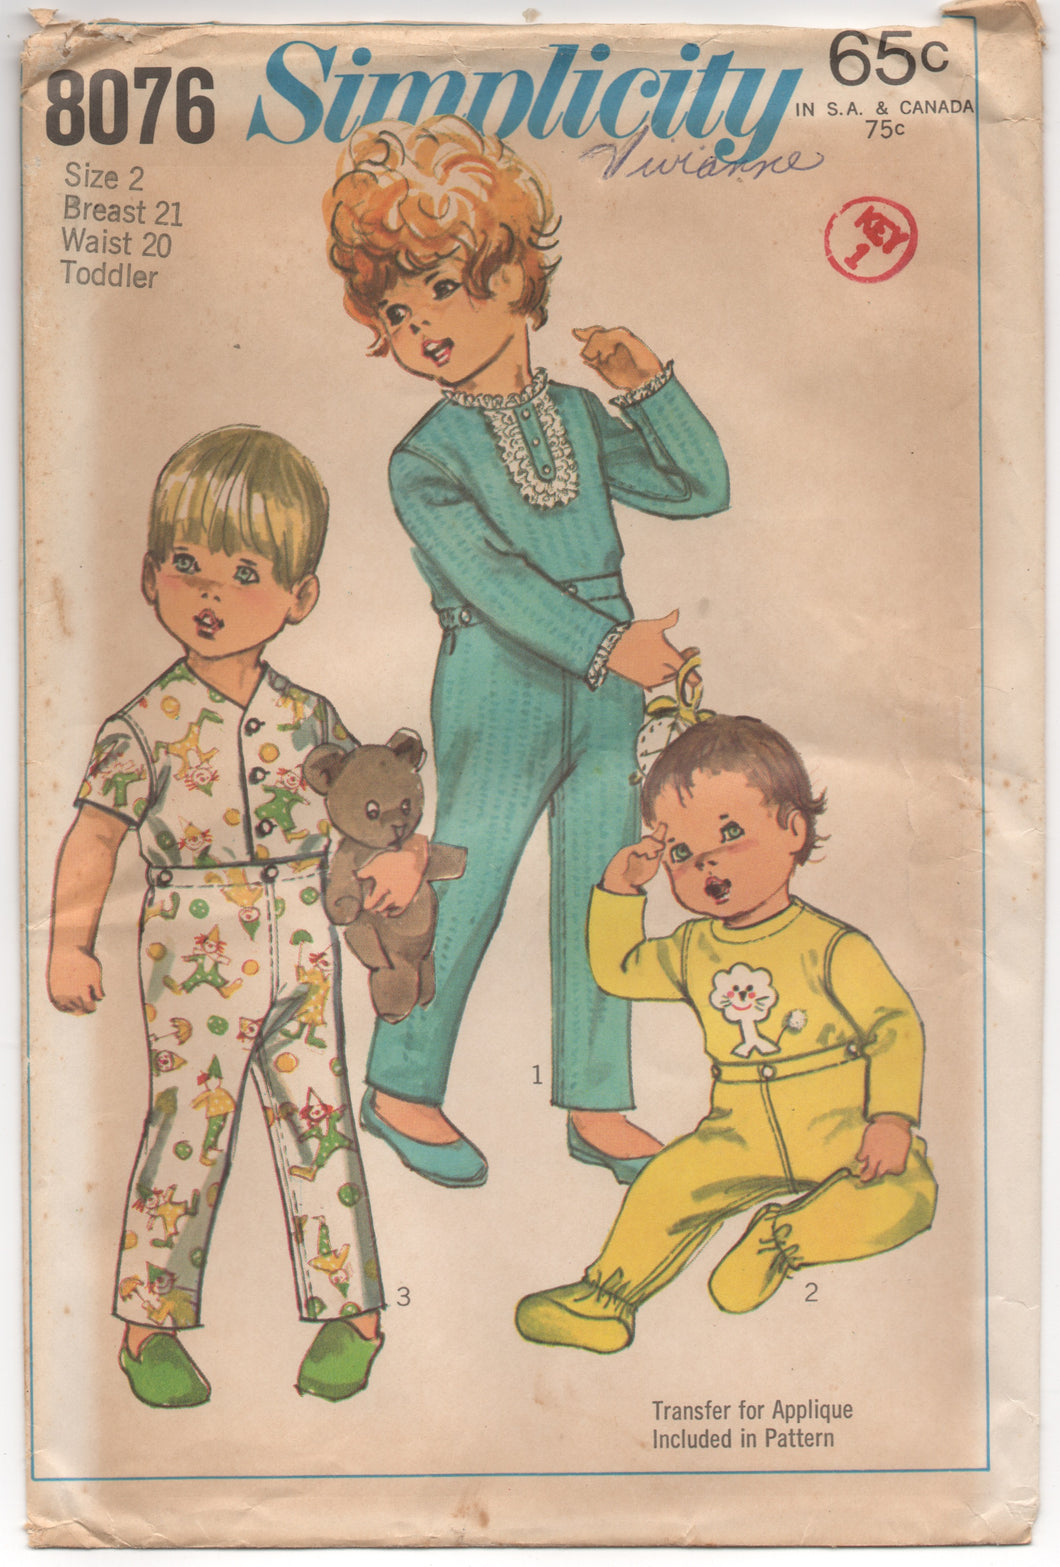 1960's Simplicity Toddler Pajama Sets in 3 styles with Lion Applique - Chest 21